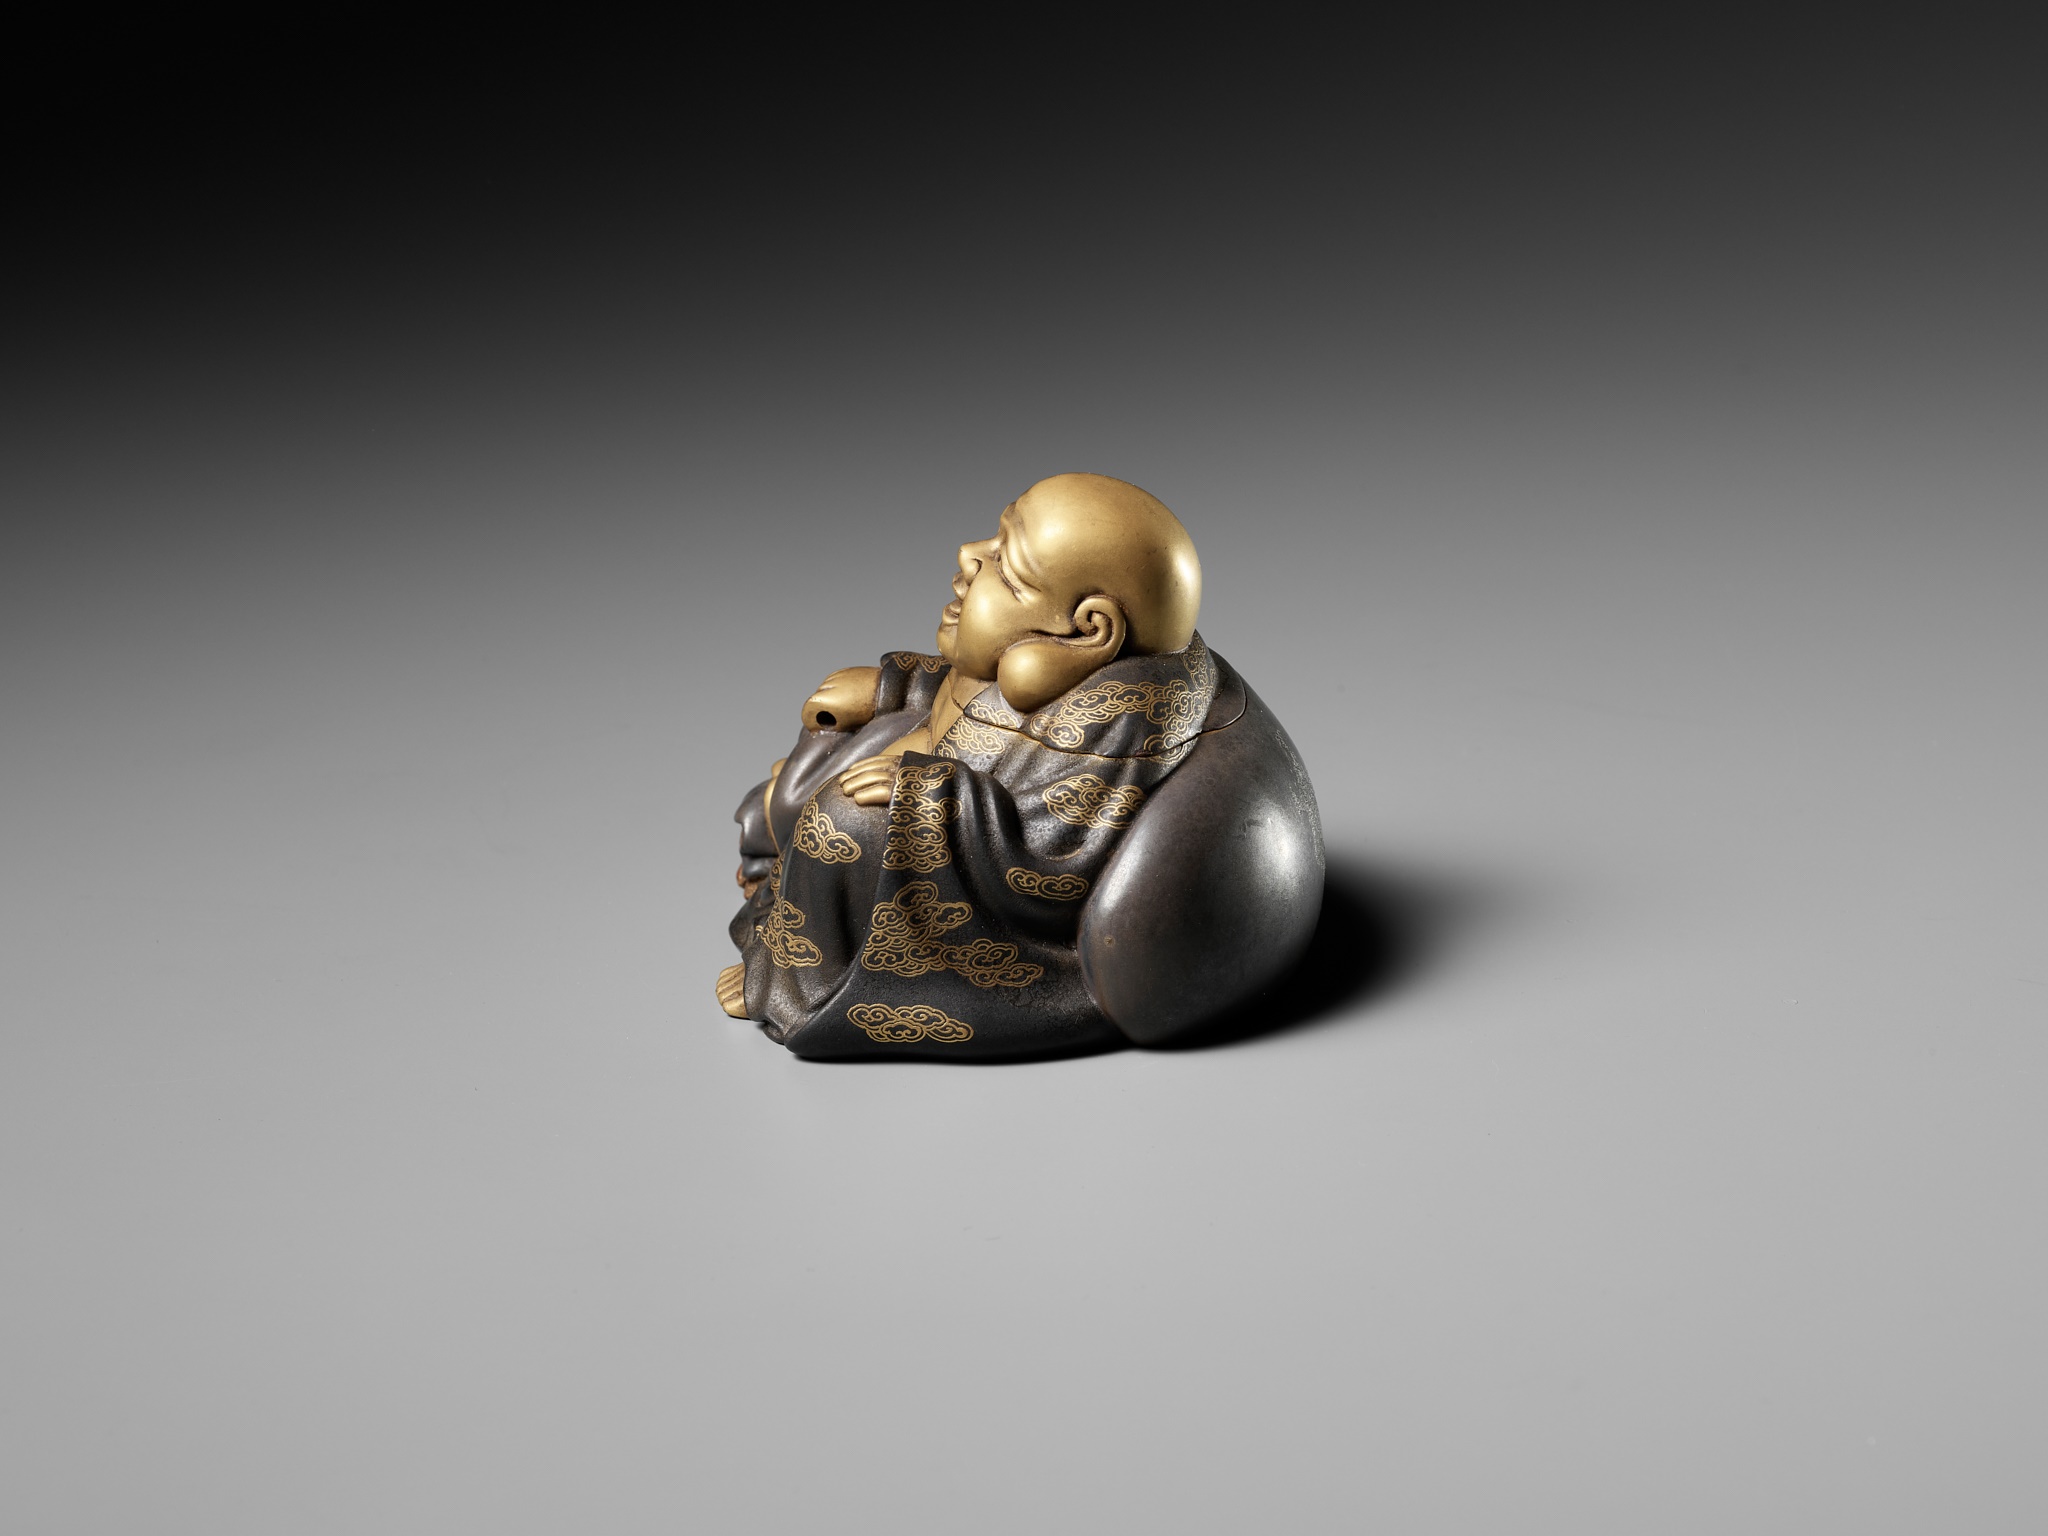 A FINE LACQUER KOGO (INCENSE BOX) AND COVER IN THE FORM OF HOTEI - Image 4 of 9